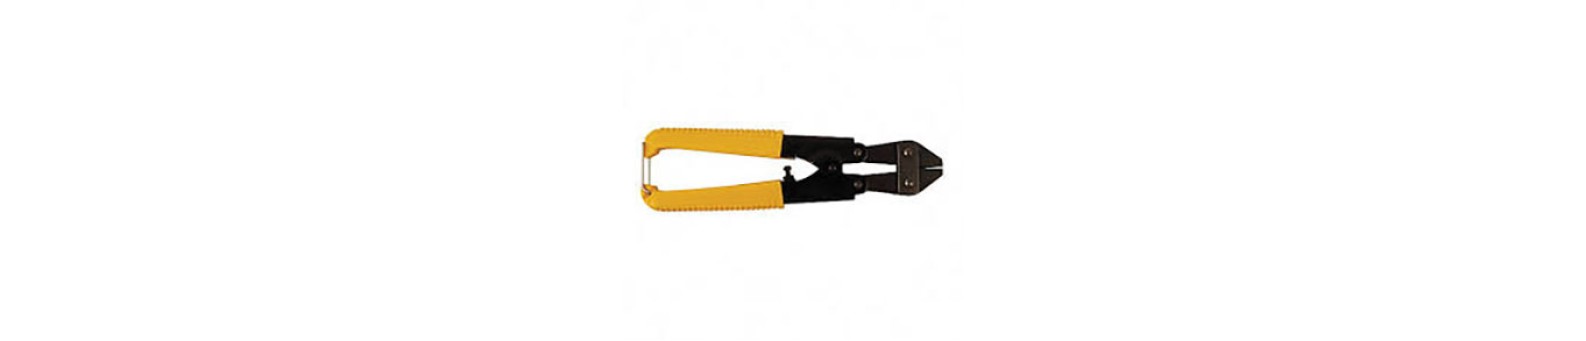 Bolt Cable & Tin Cutters